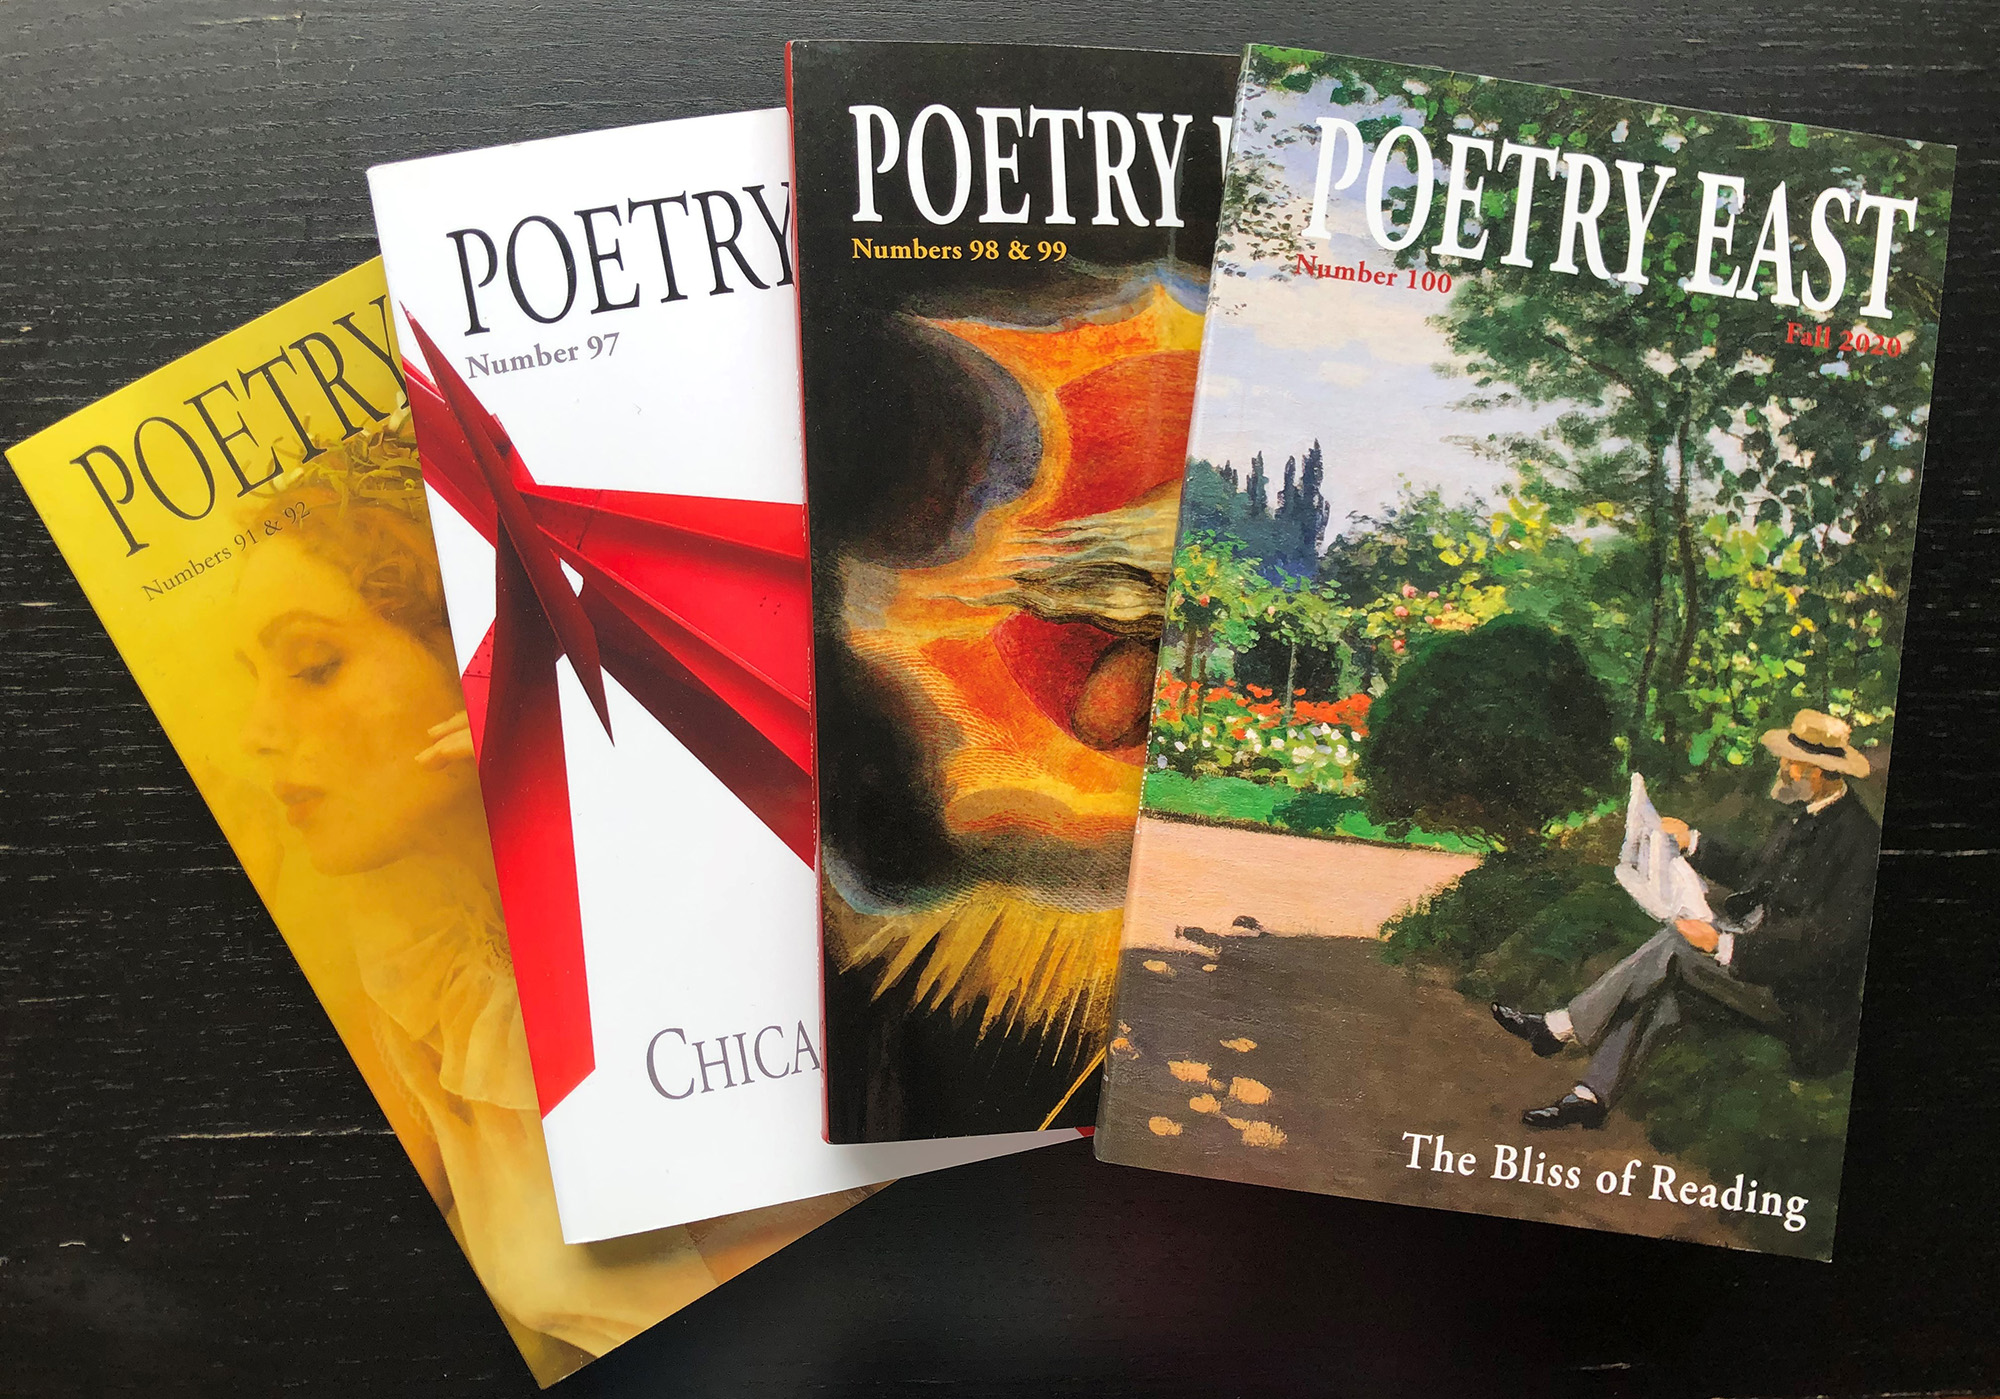 Hard copies of the Poetry East journal on a table